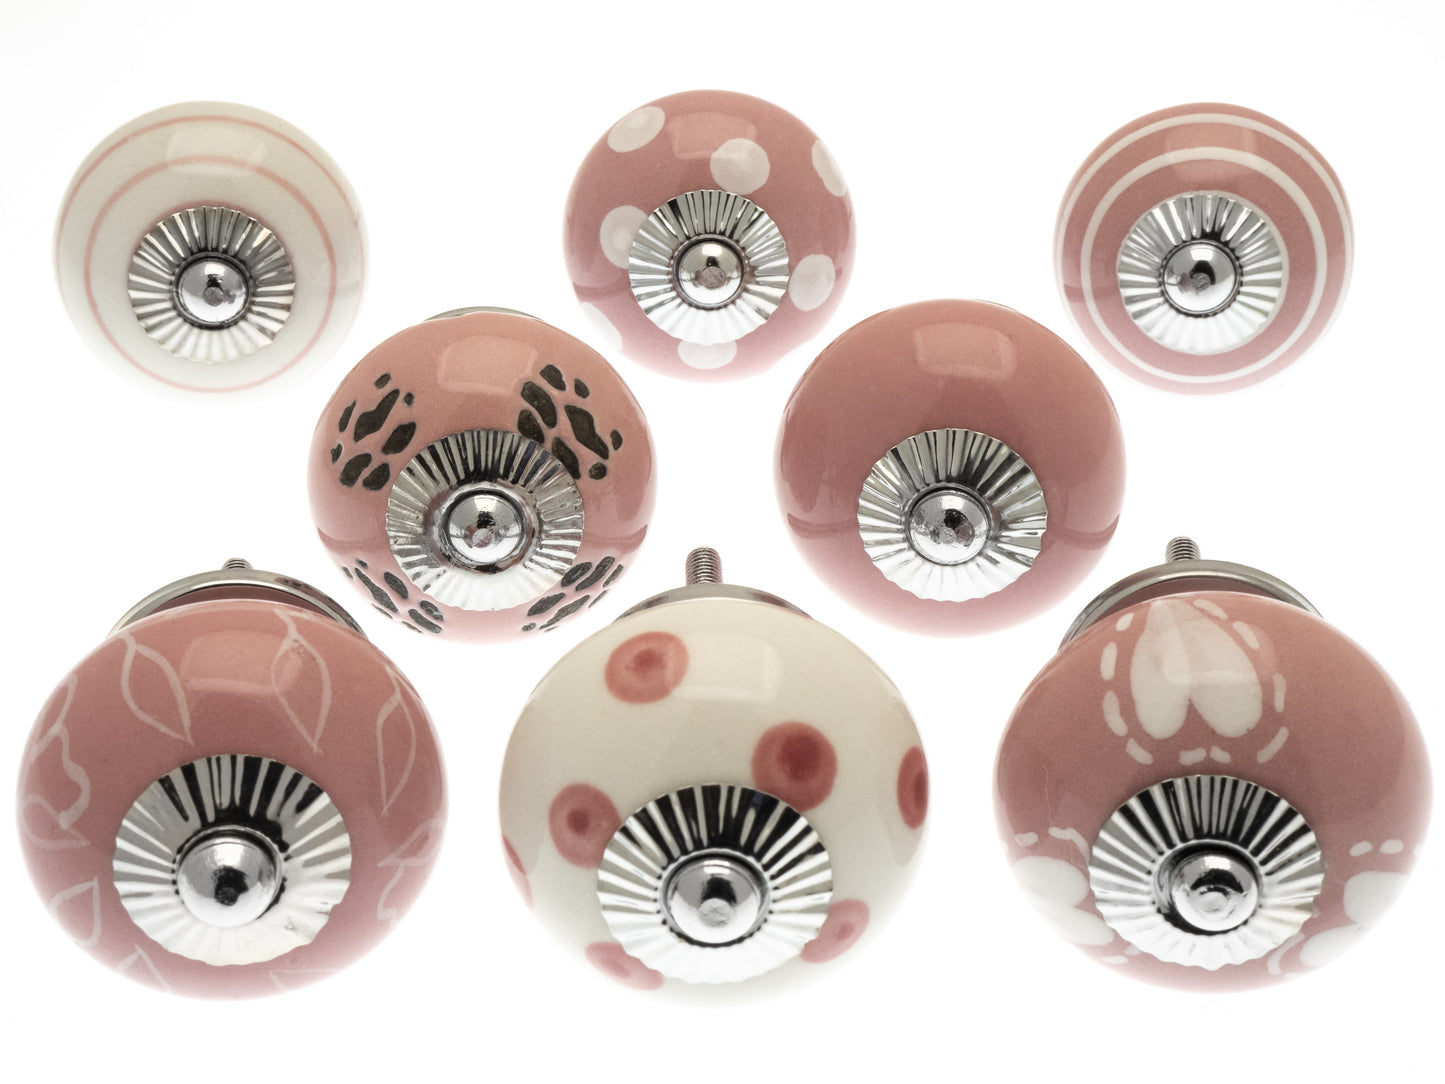 Ceramic Cupboard Knobs in Pink and White Designs with Silver Fittings